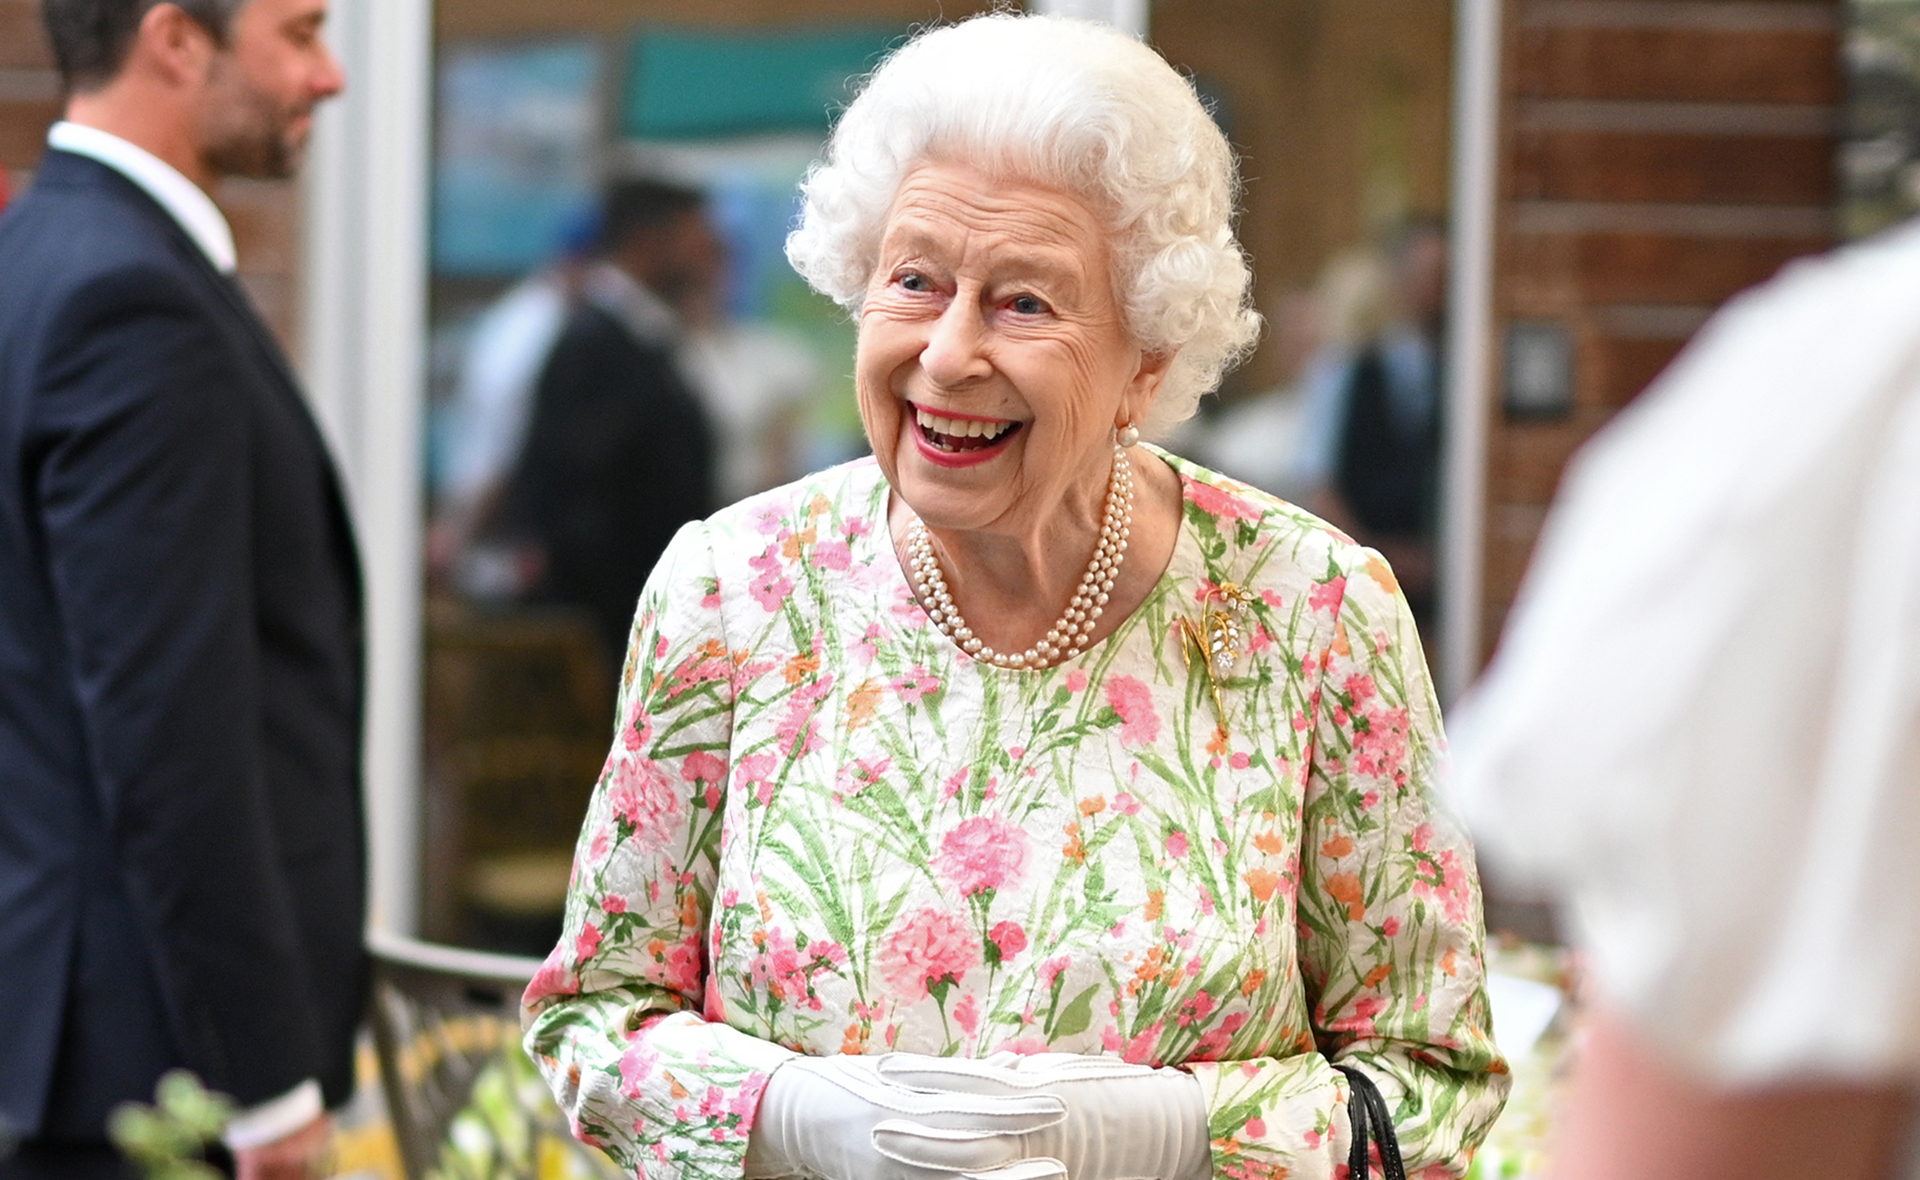 The Queen just turned down an ‘Oldie Award’ at 95 but not for the reason you’d expect